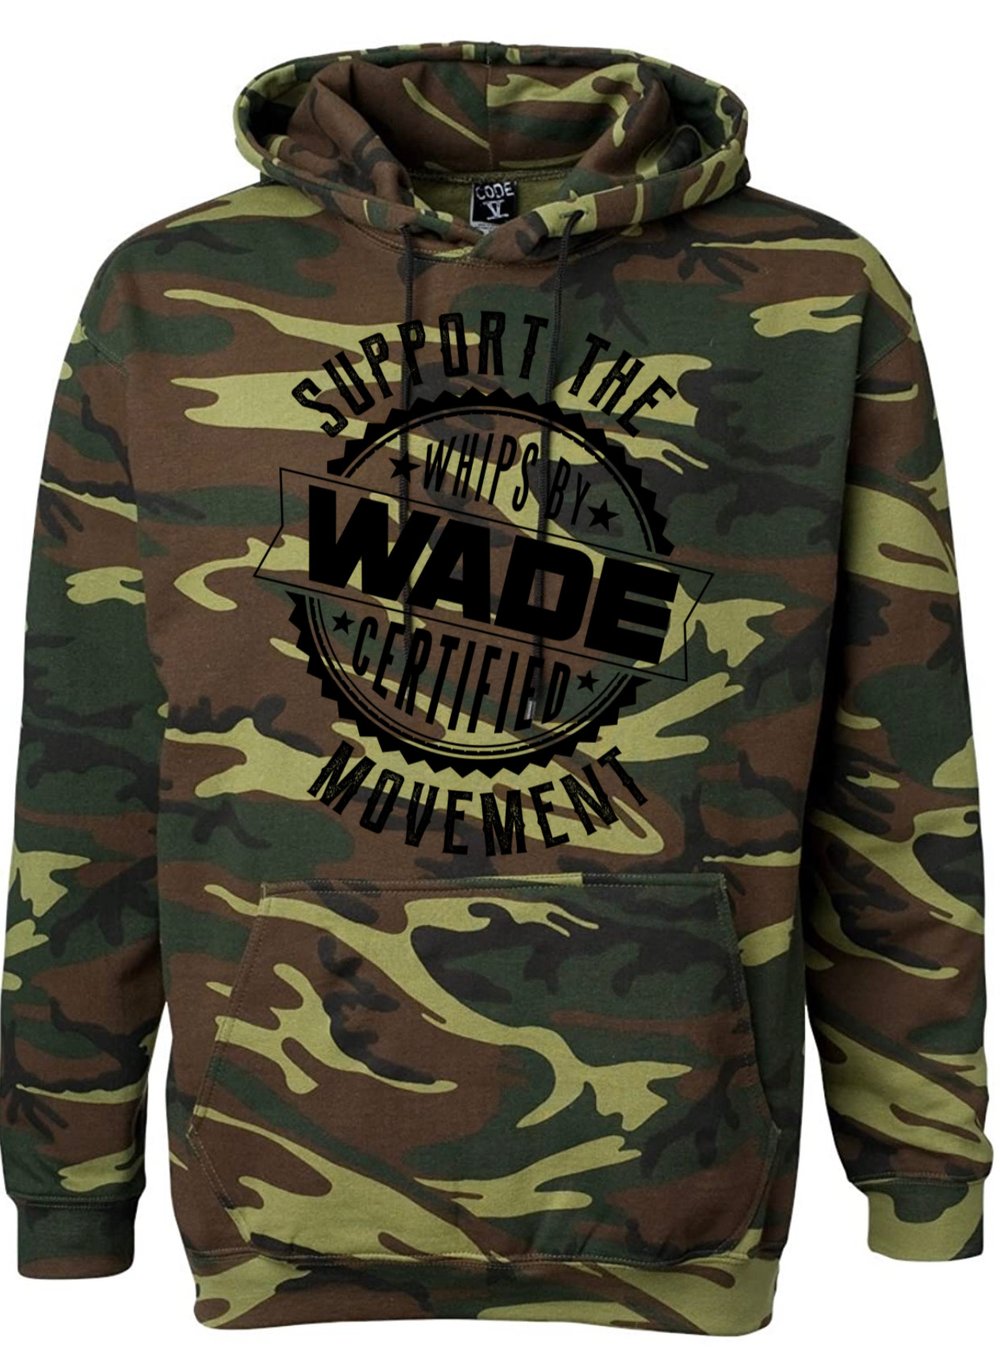 Camo Support The Movement Hoodie : *PRE-ORDER* Black Print